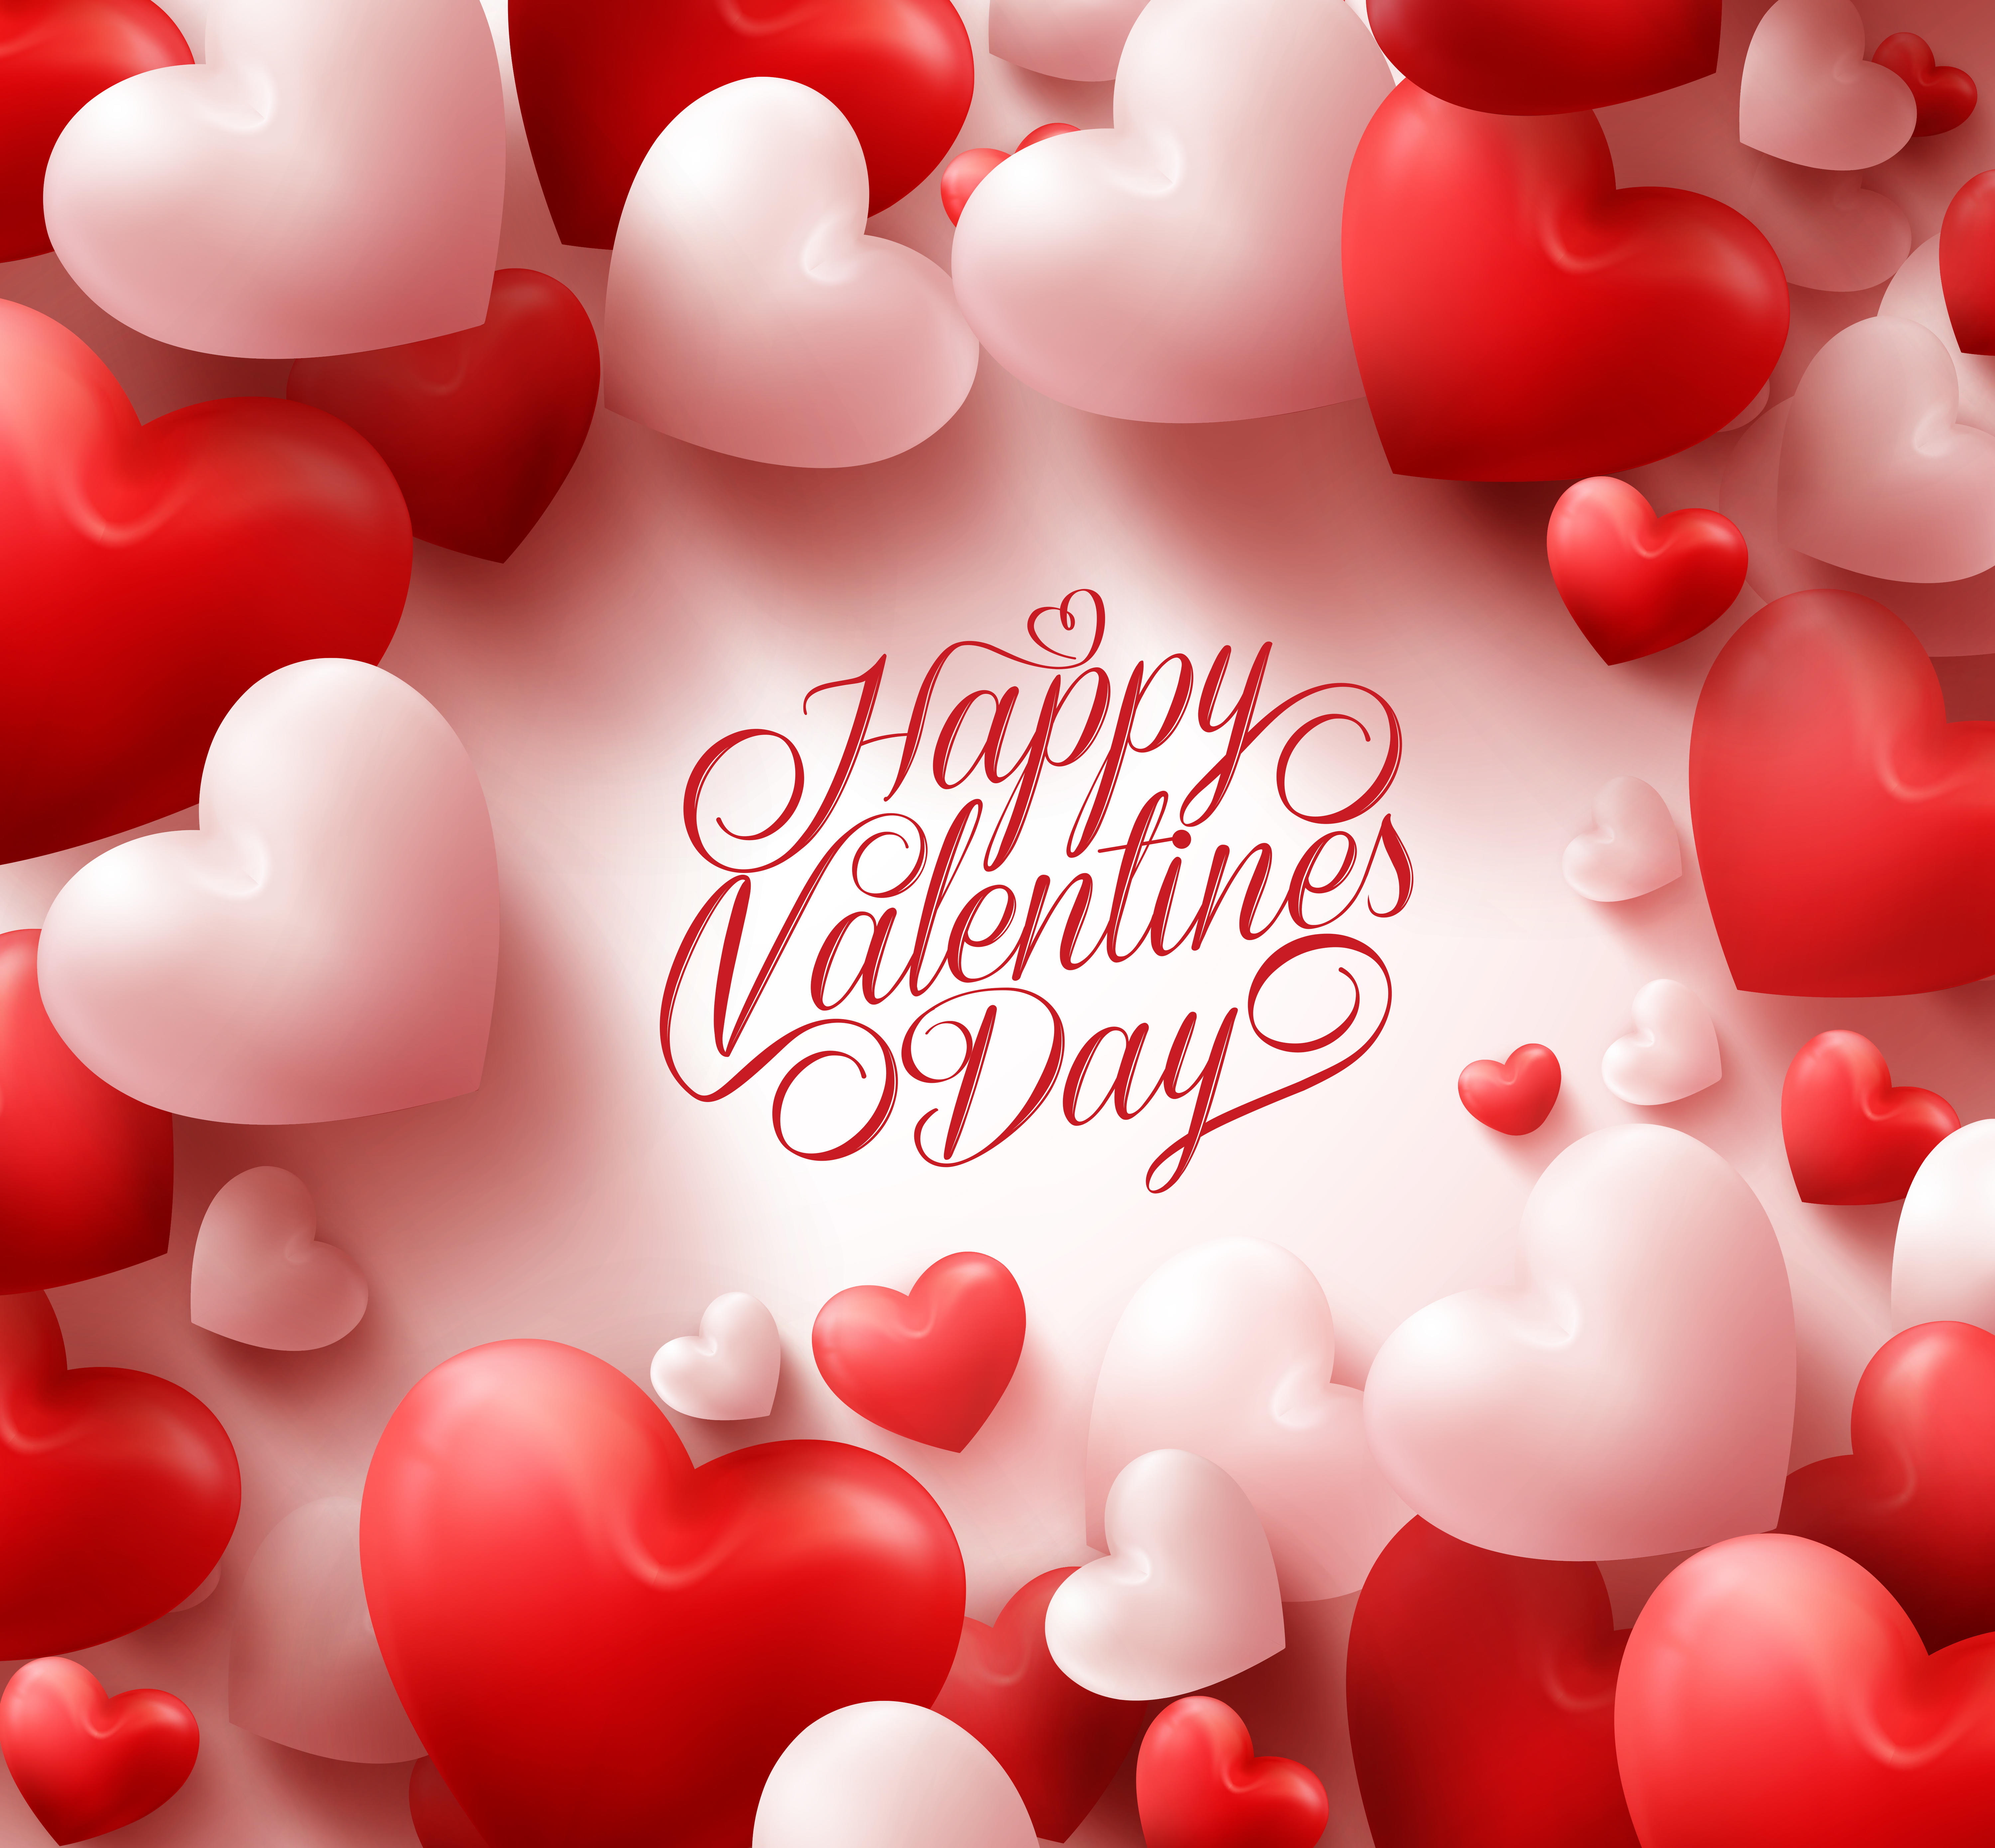 Wallpapers hearts text Valentine day on the desktop